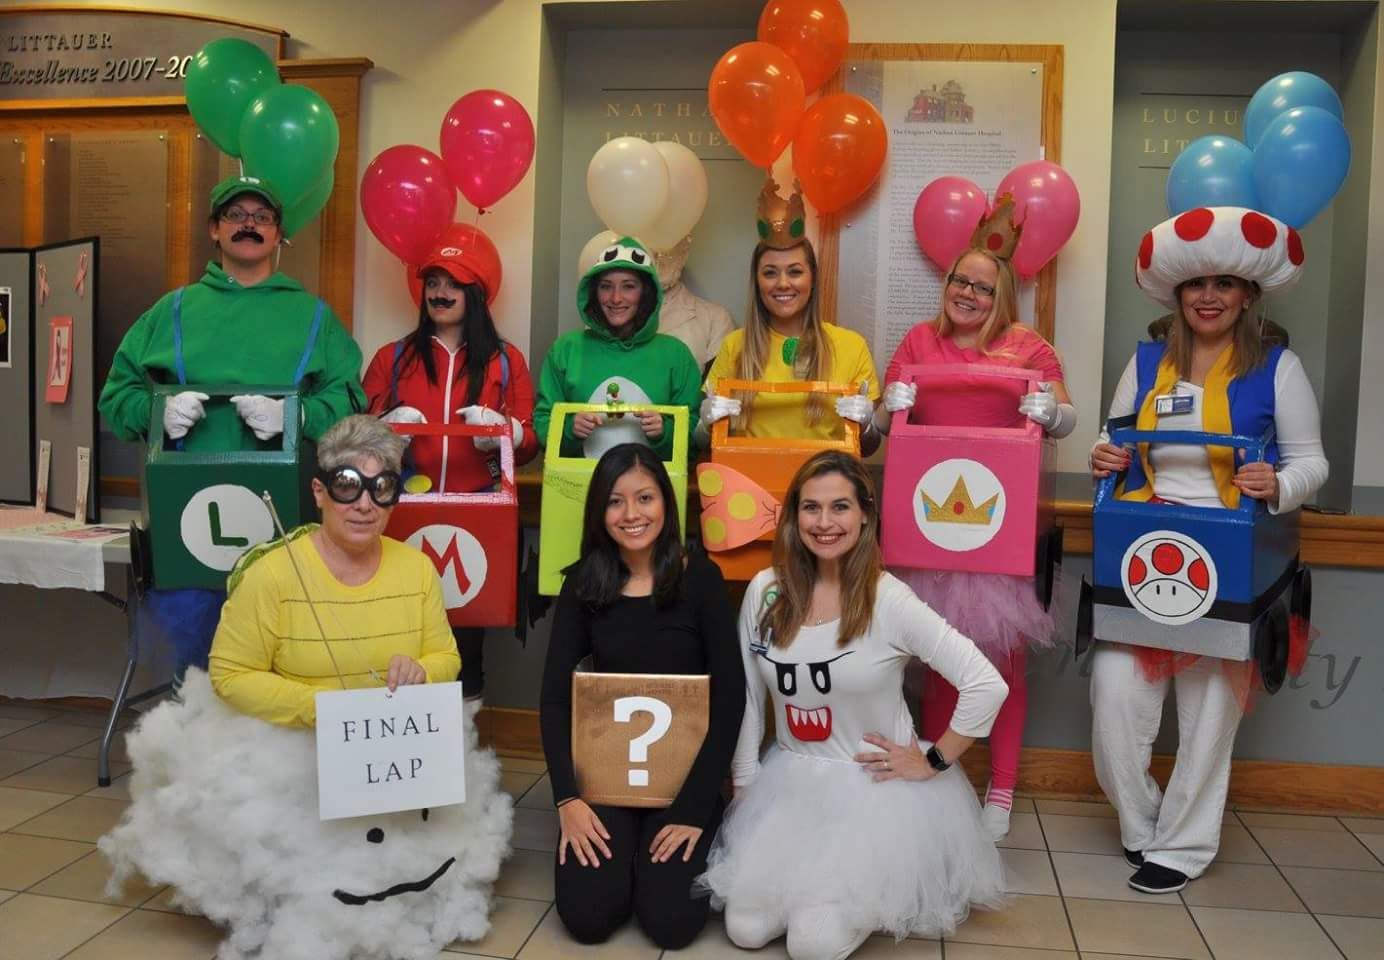 Halloween Costume Ideas for Groups & Couples